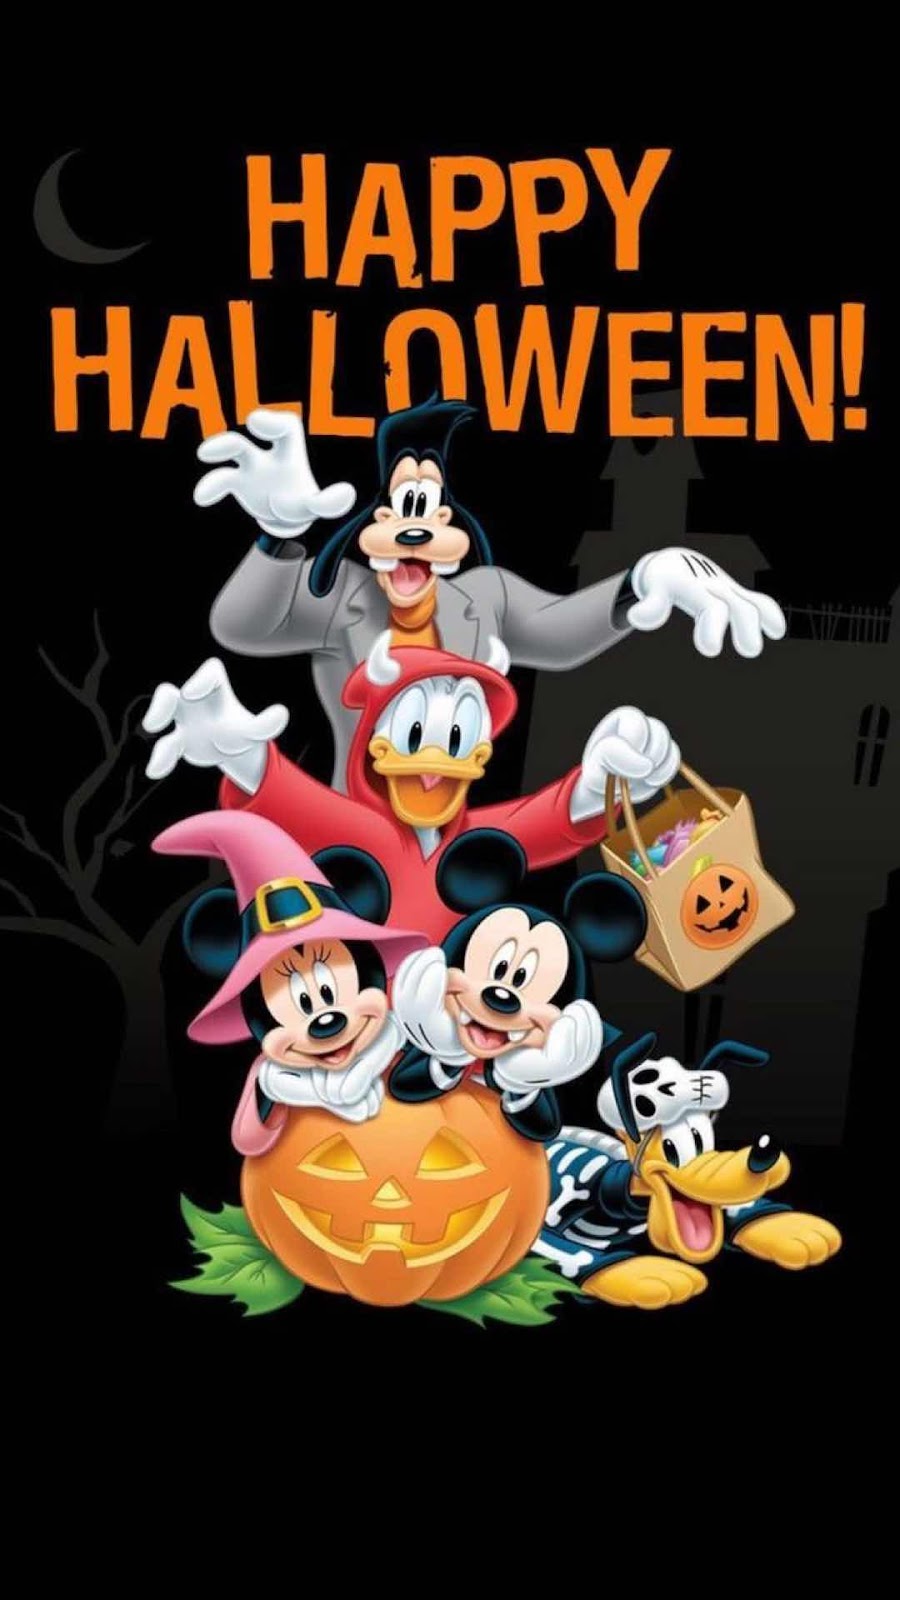 iPhone and Android Wallpaper: Disney Halloween Wallpaper for iPhone and Android